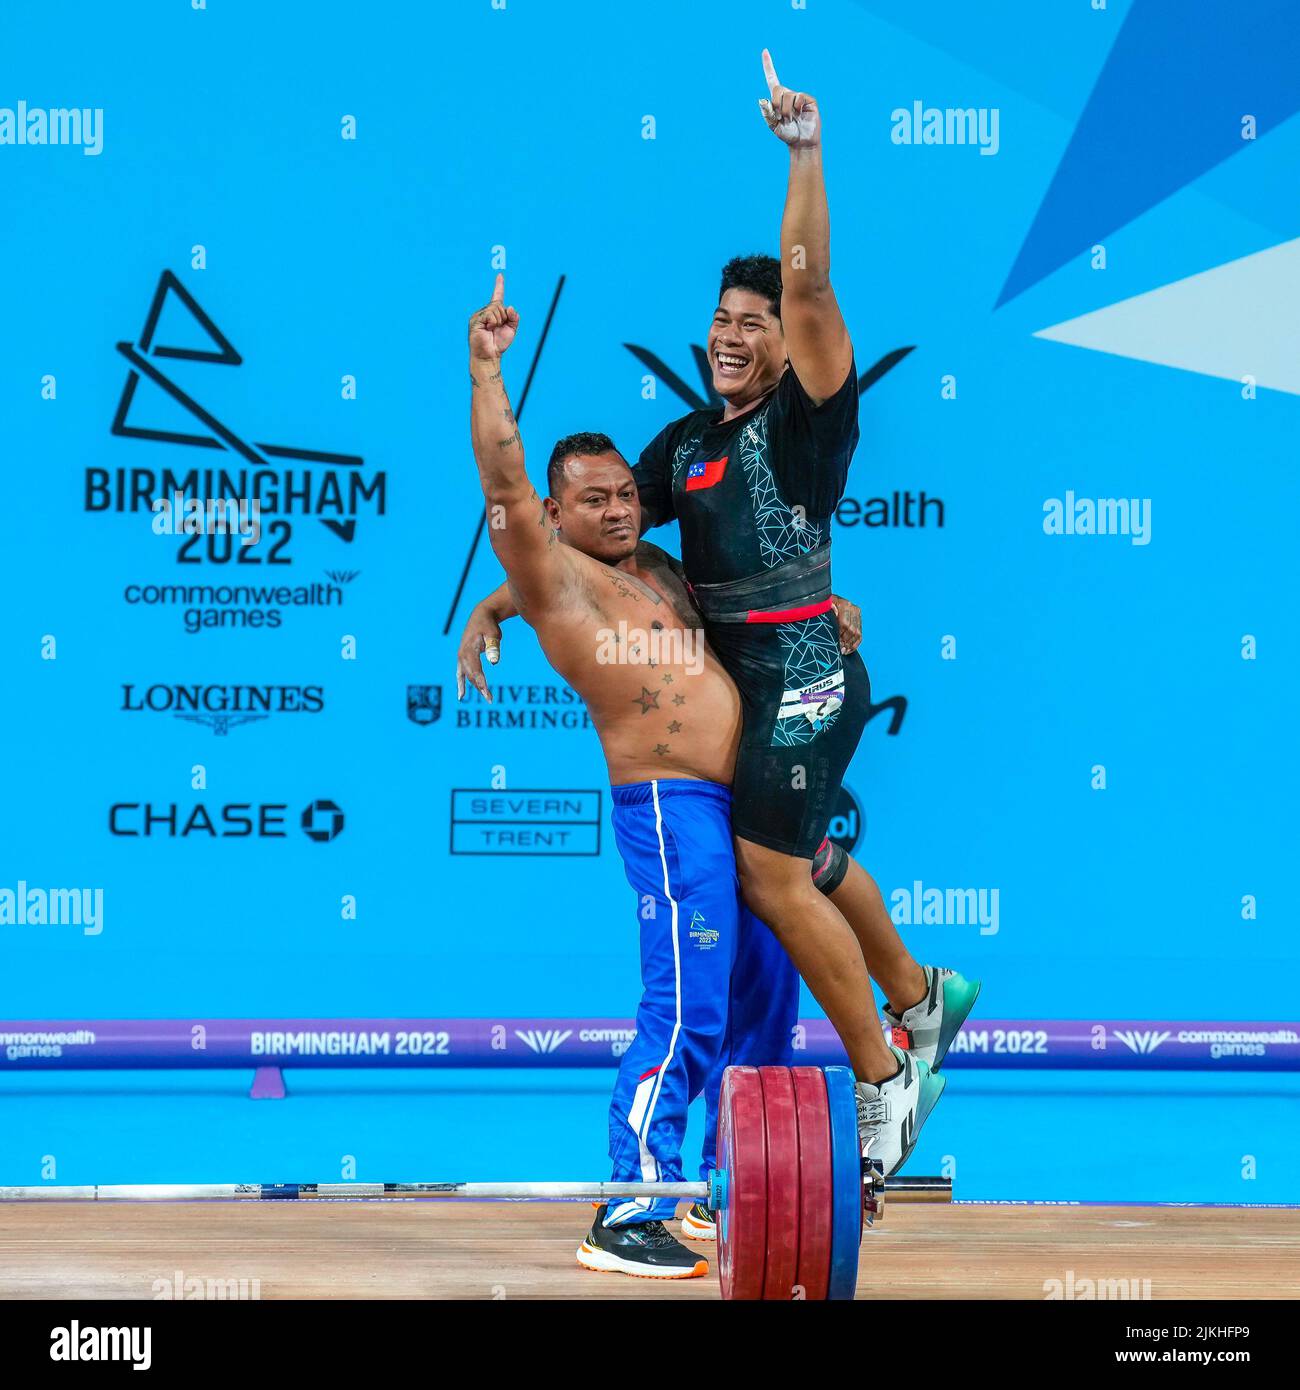 Birmingham, UK. 02nd Aug, 2022. Don OPELOGE (SAM) (right) celebrates after securing Gold in the 2022 Commonwealth Games Men's 96kg Weightlifting Final with Games Records in the Snatch (171kg) and Clean & Jerk (210kg) at the NEC, Birmingham, England on the 2 August 2022. Photo by David Horn. Credit: PRiME Media Images/Alamy Live News Stock Photo